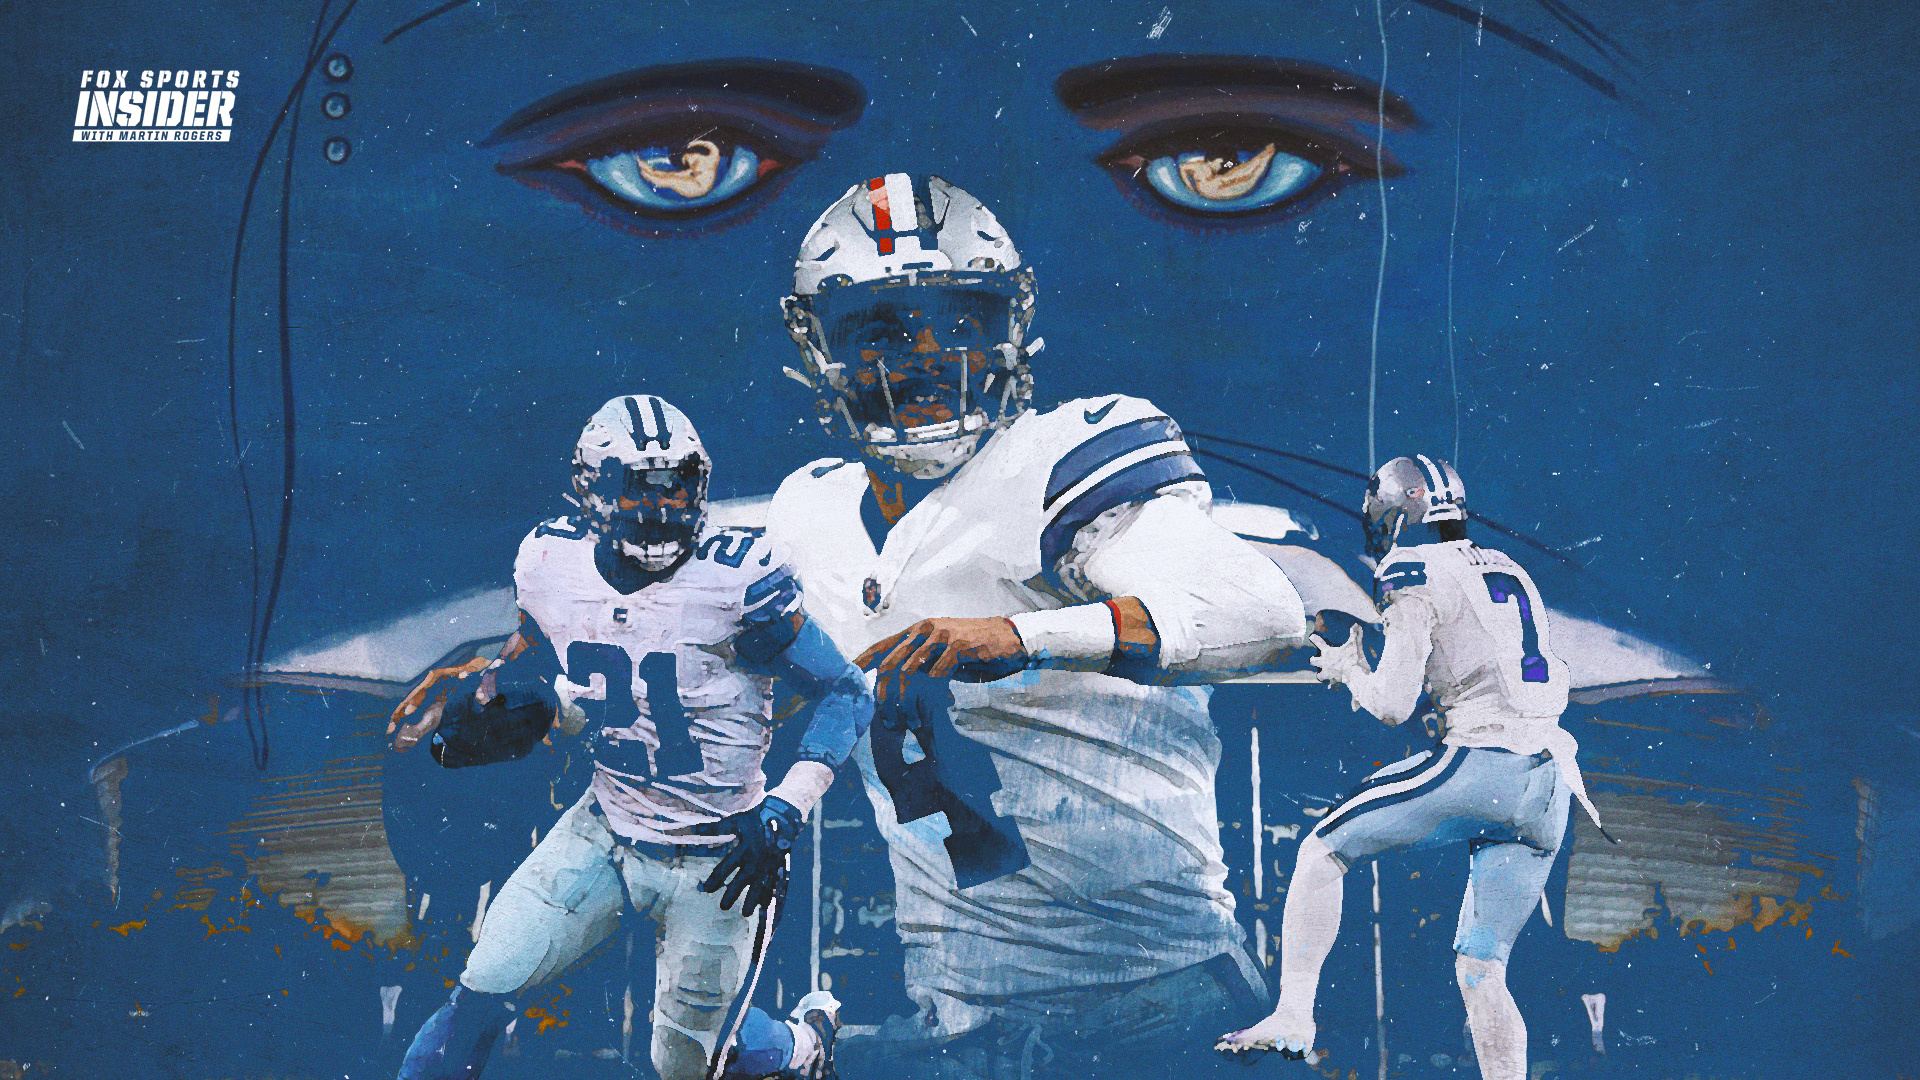 The Dallas Cowboys have something to prove as they host the Atlanta Falcons on Sunday